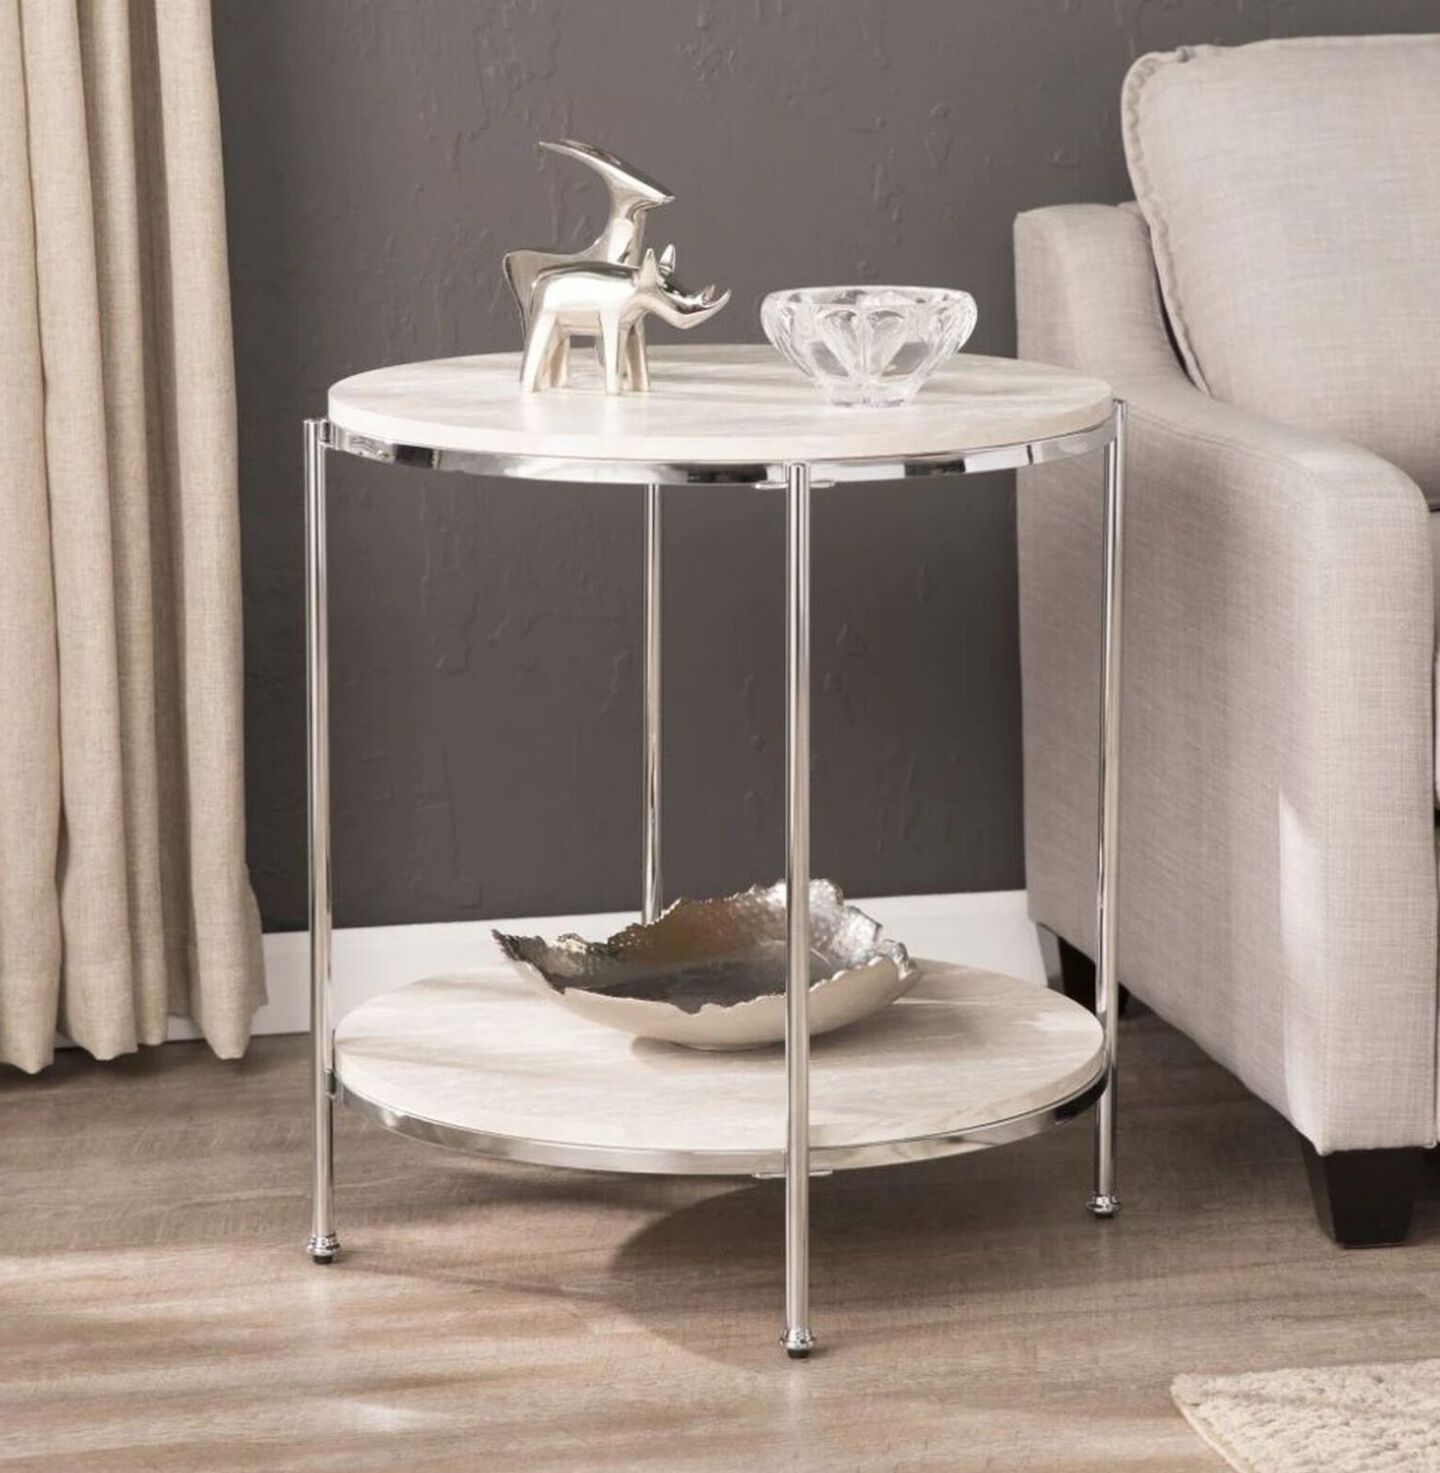 White marble two tiered table with silver metallic hardware